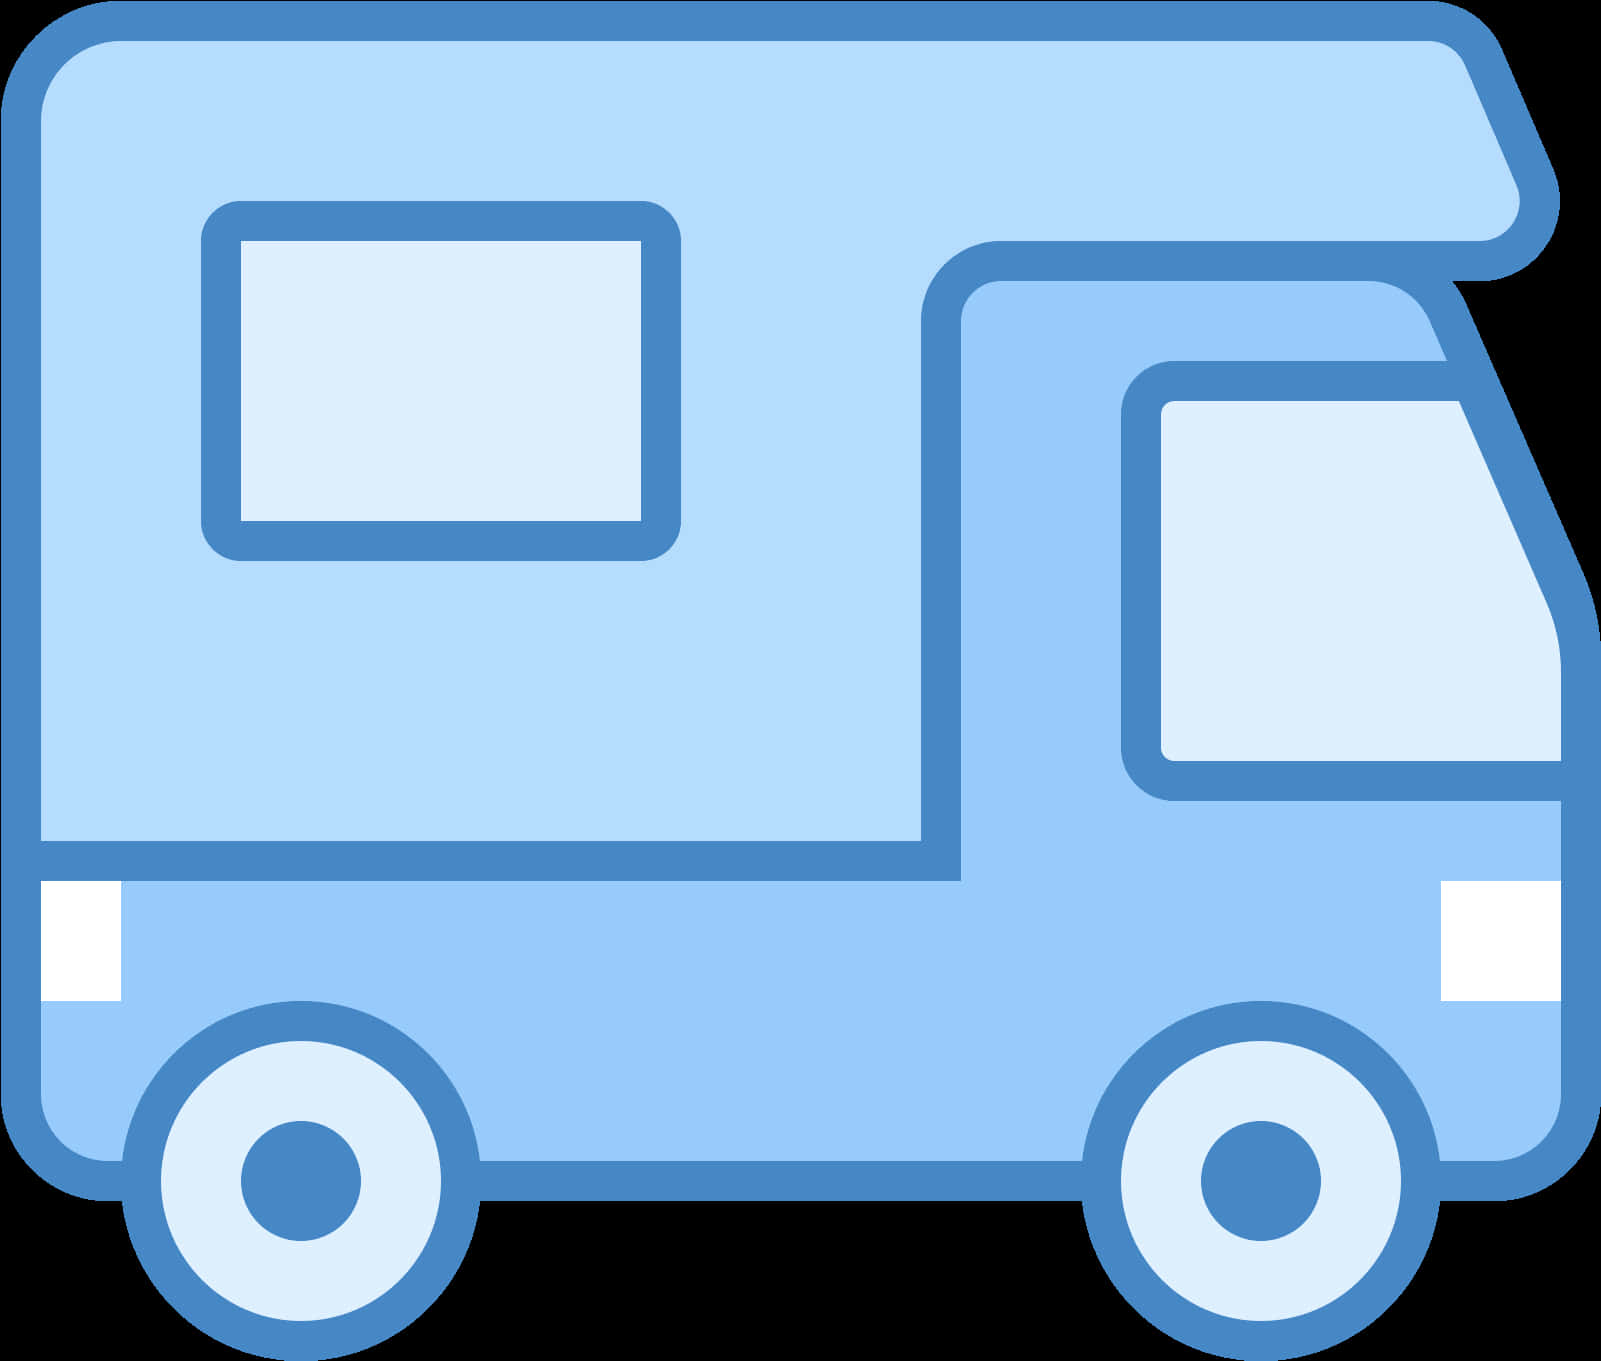 A Blue Truck With Wheels